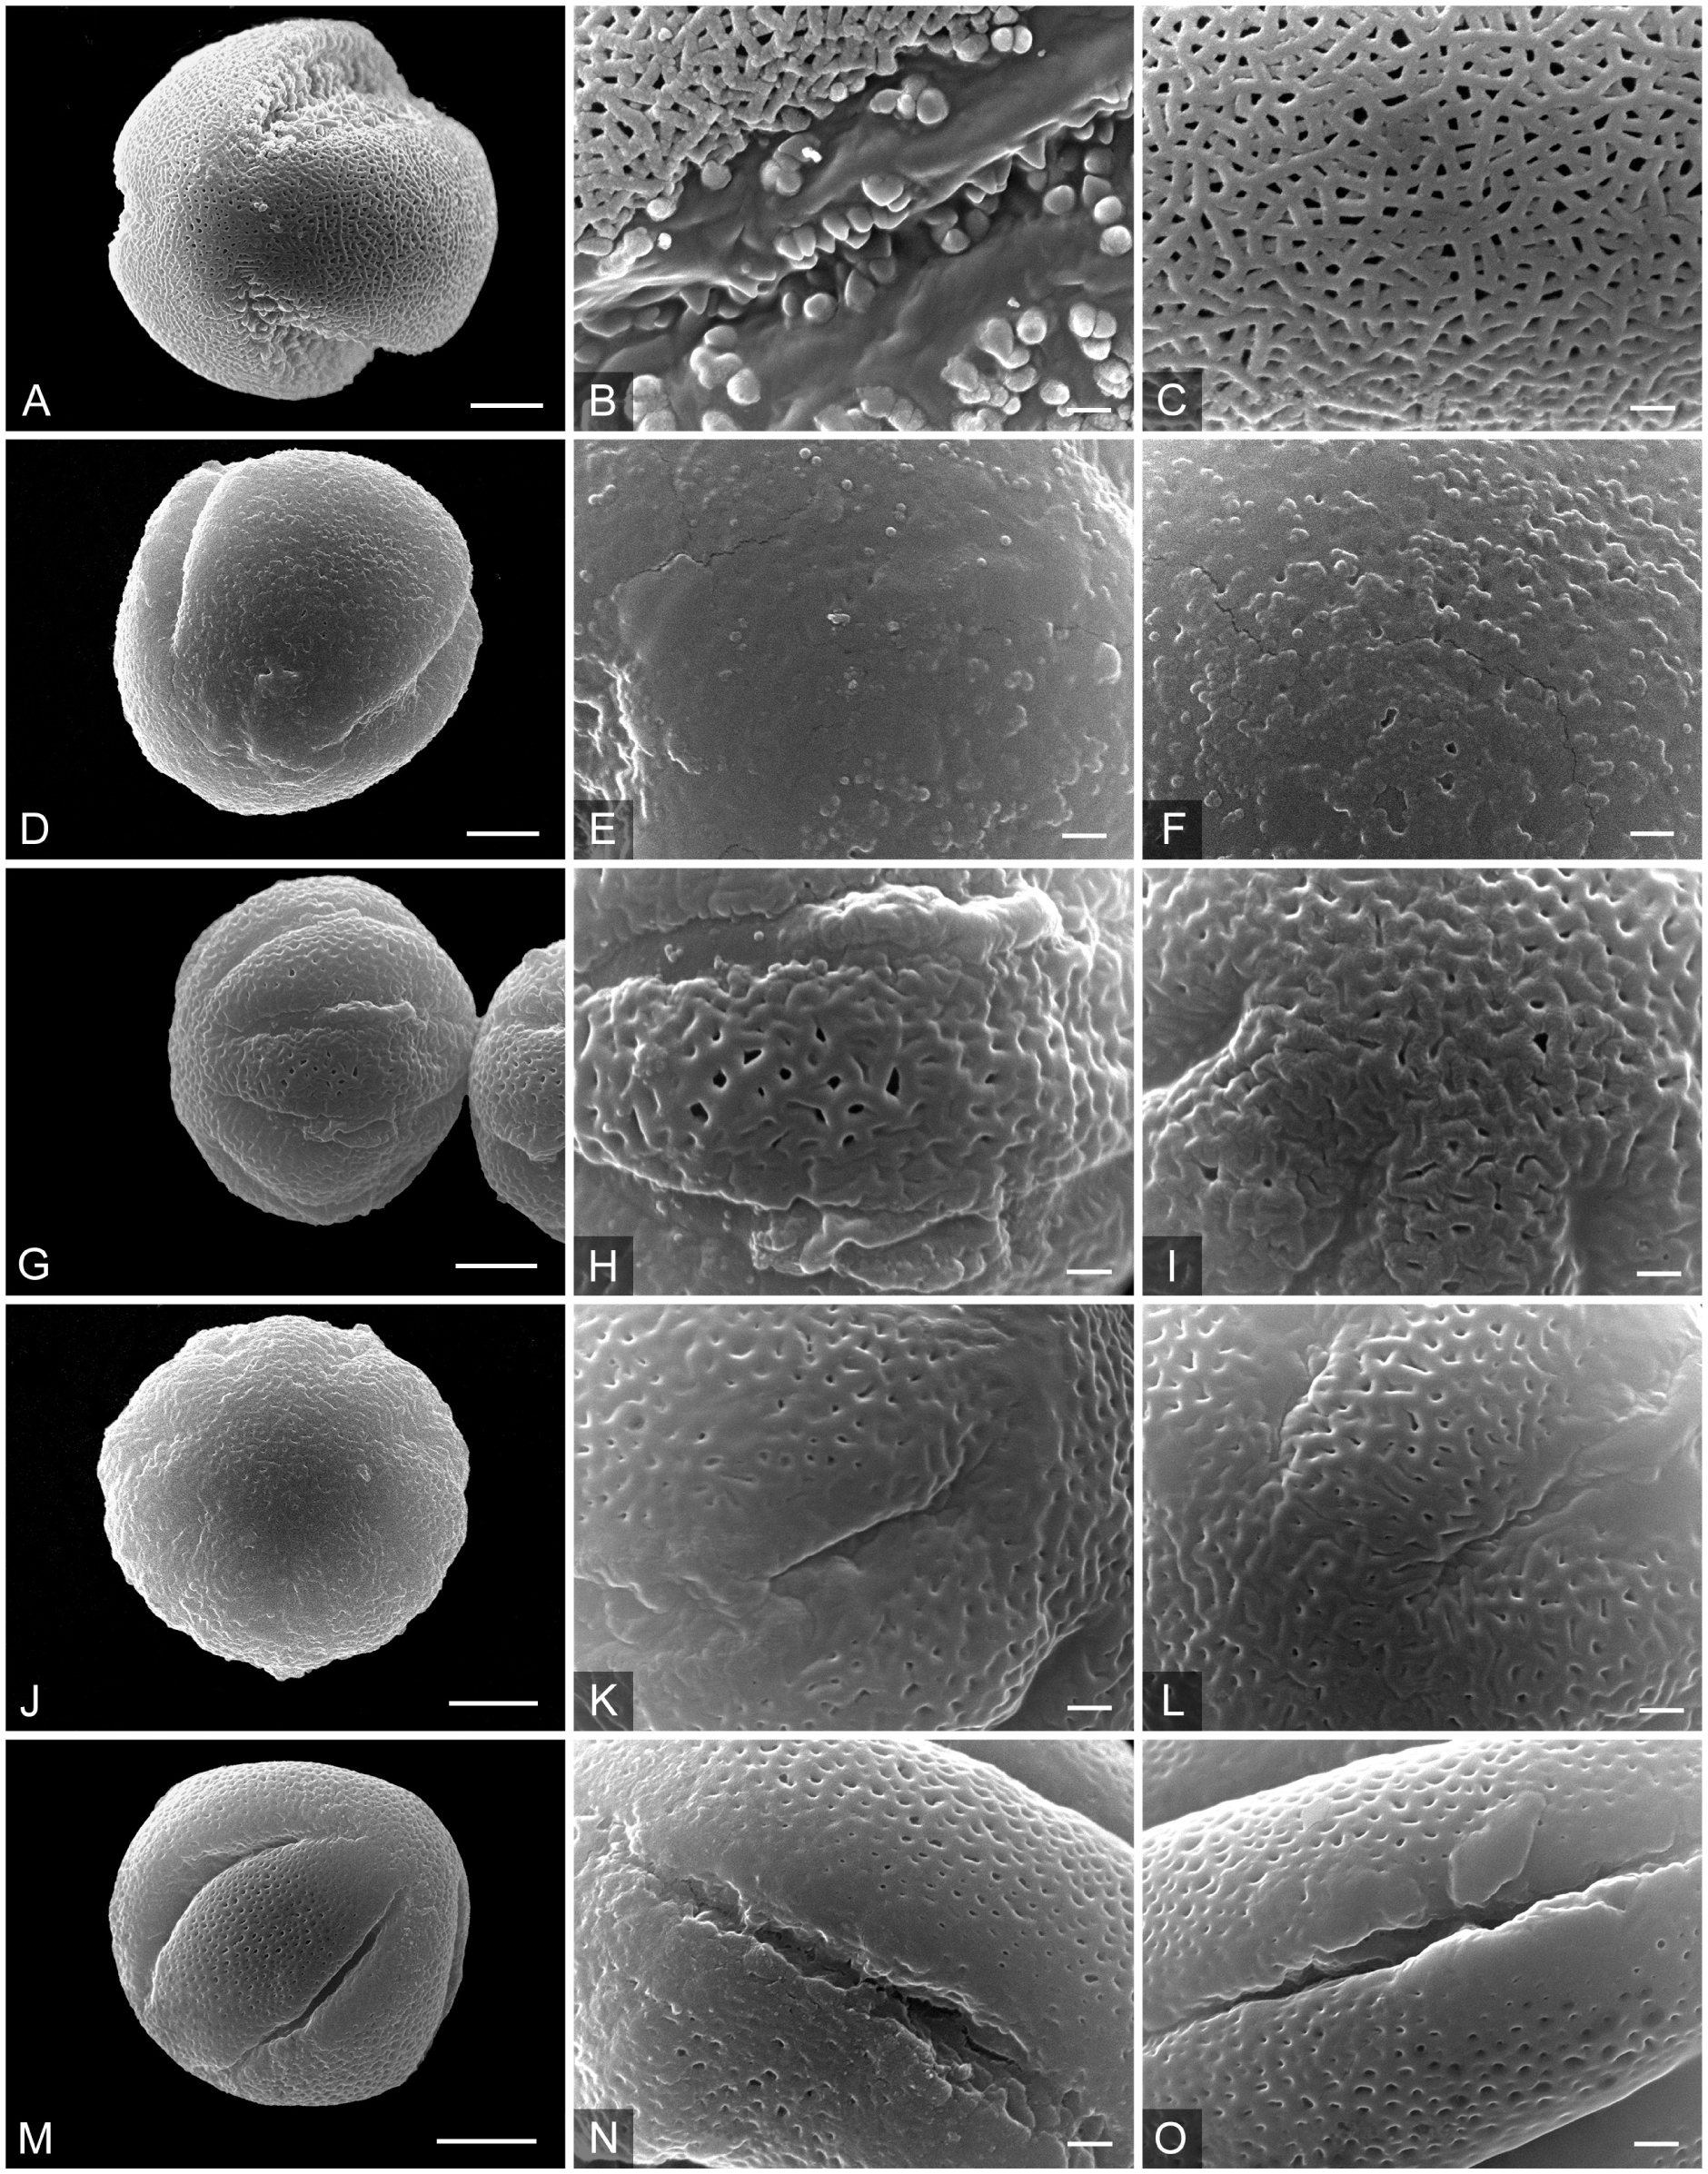 Pollen Morphology Of The Tribe Hemimerideae Possible Evidence Of Ancestral Pollen Types And Parallel Evolution In The Basalmost Clade Of Scrophulariaceae S Str